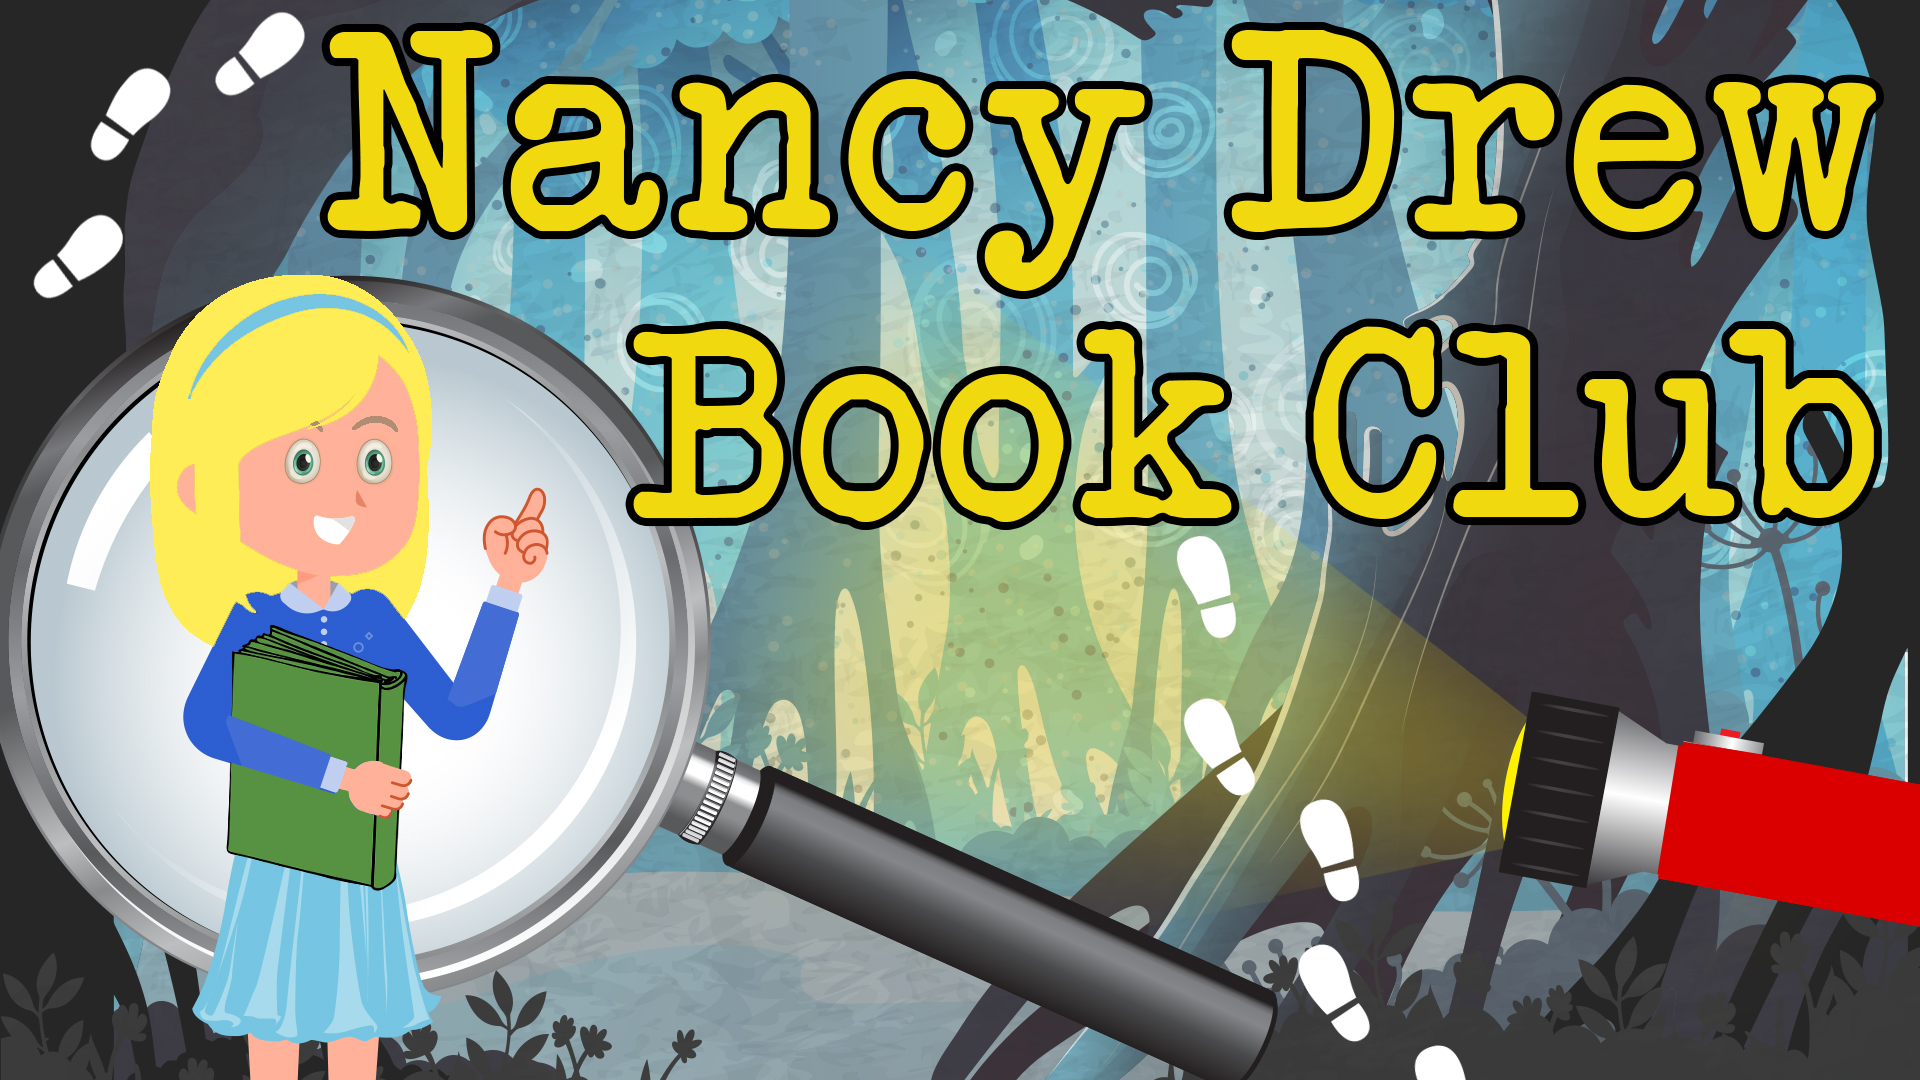 Image reads "Nancy Drew Book Club" against a dark forest background. A blonde girl holding a book is to the left of the title and a large magnifying glass is behind her. A flashlight is turned on and underneath the title. Footprints are scattered among the image.